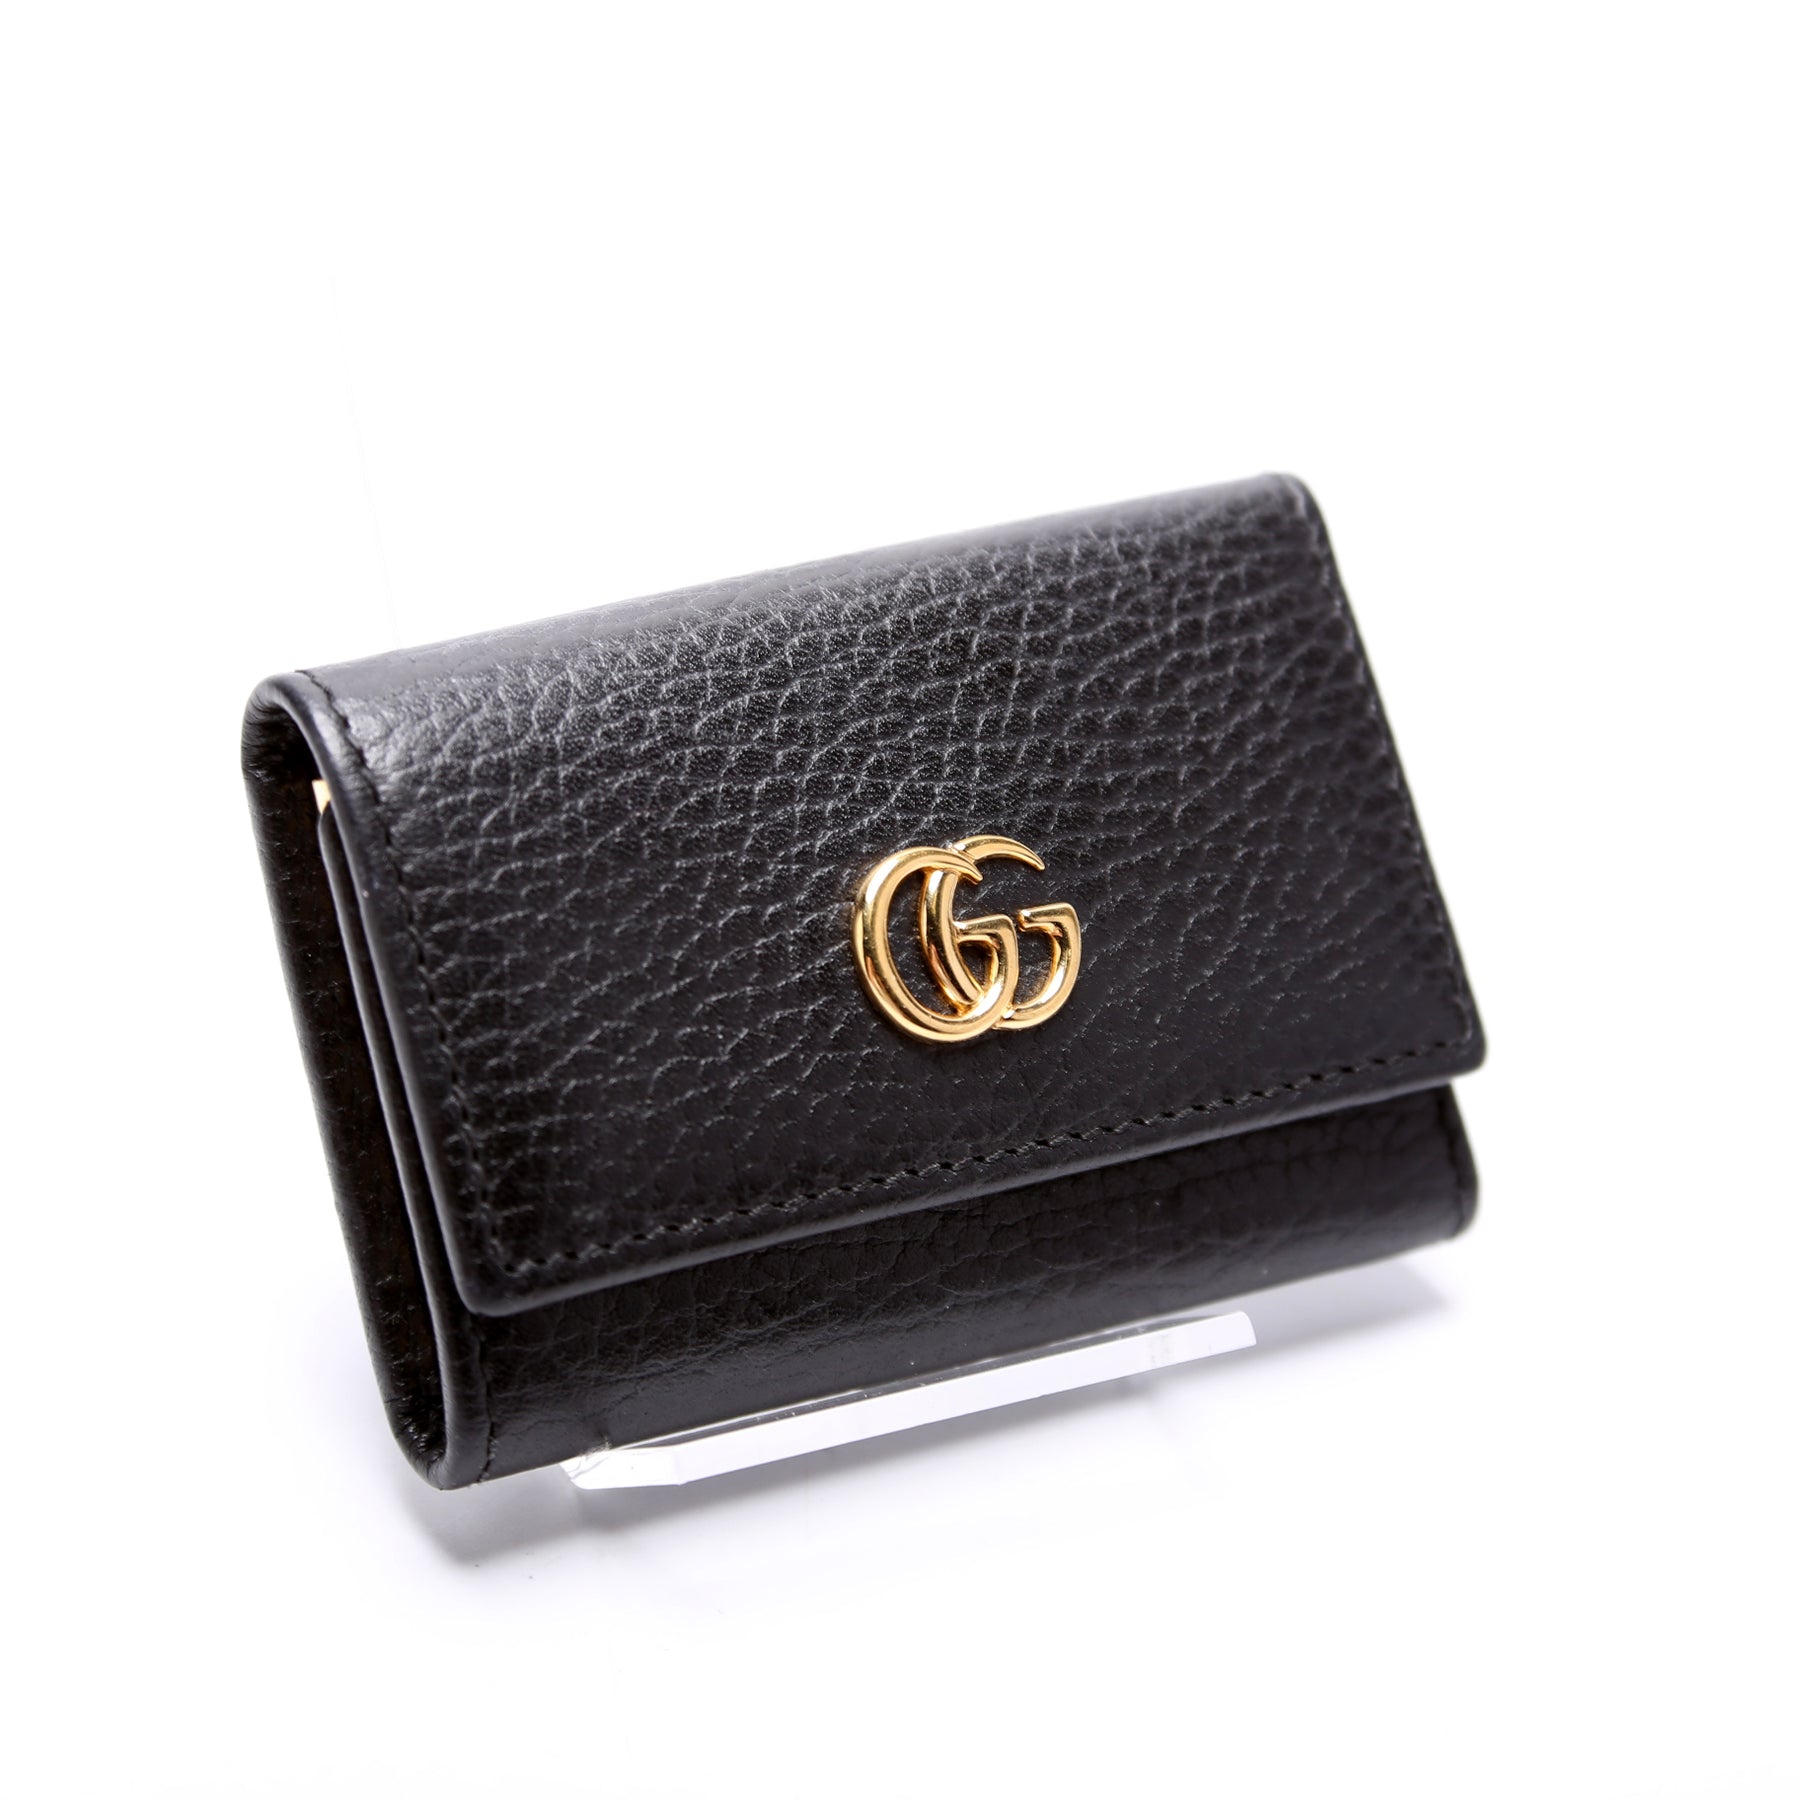 GG Marmont leather key case